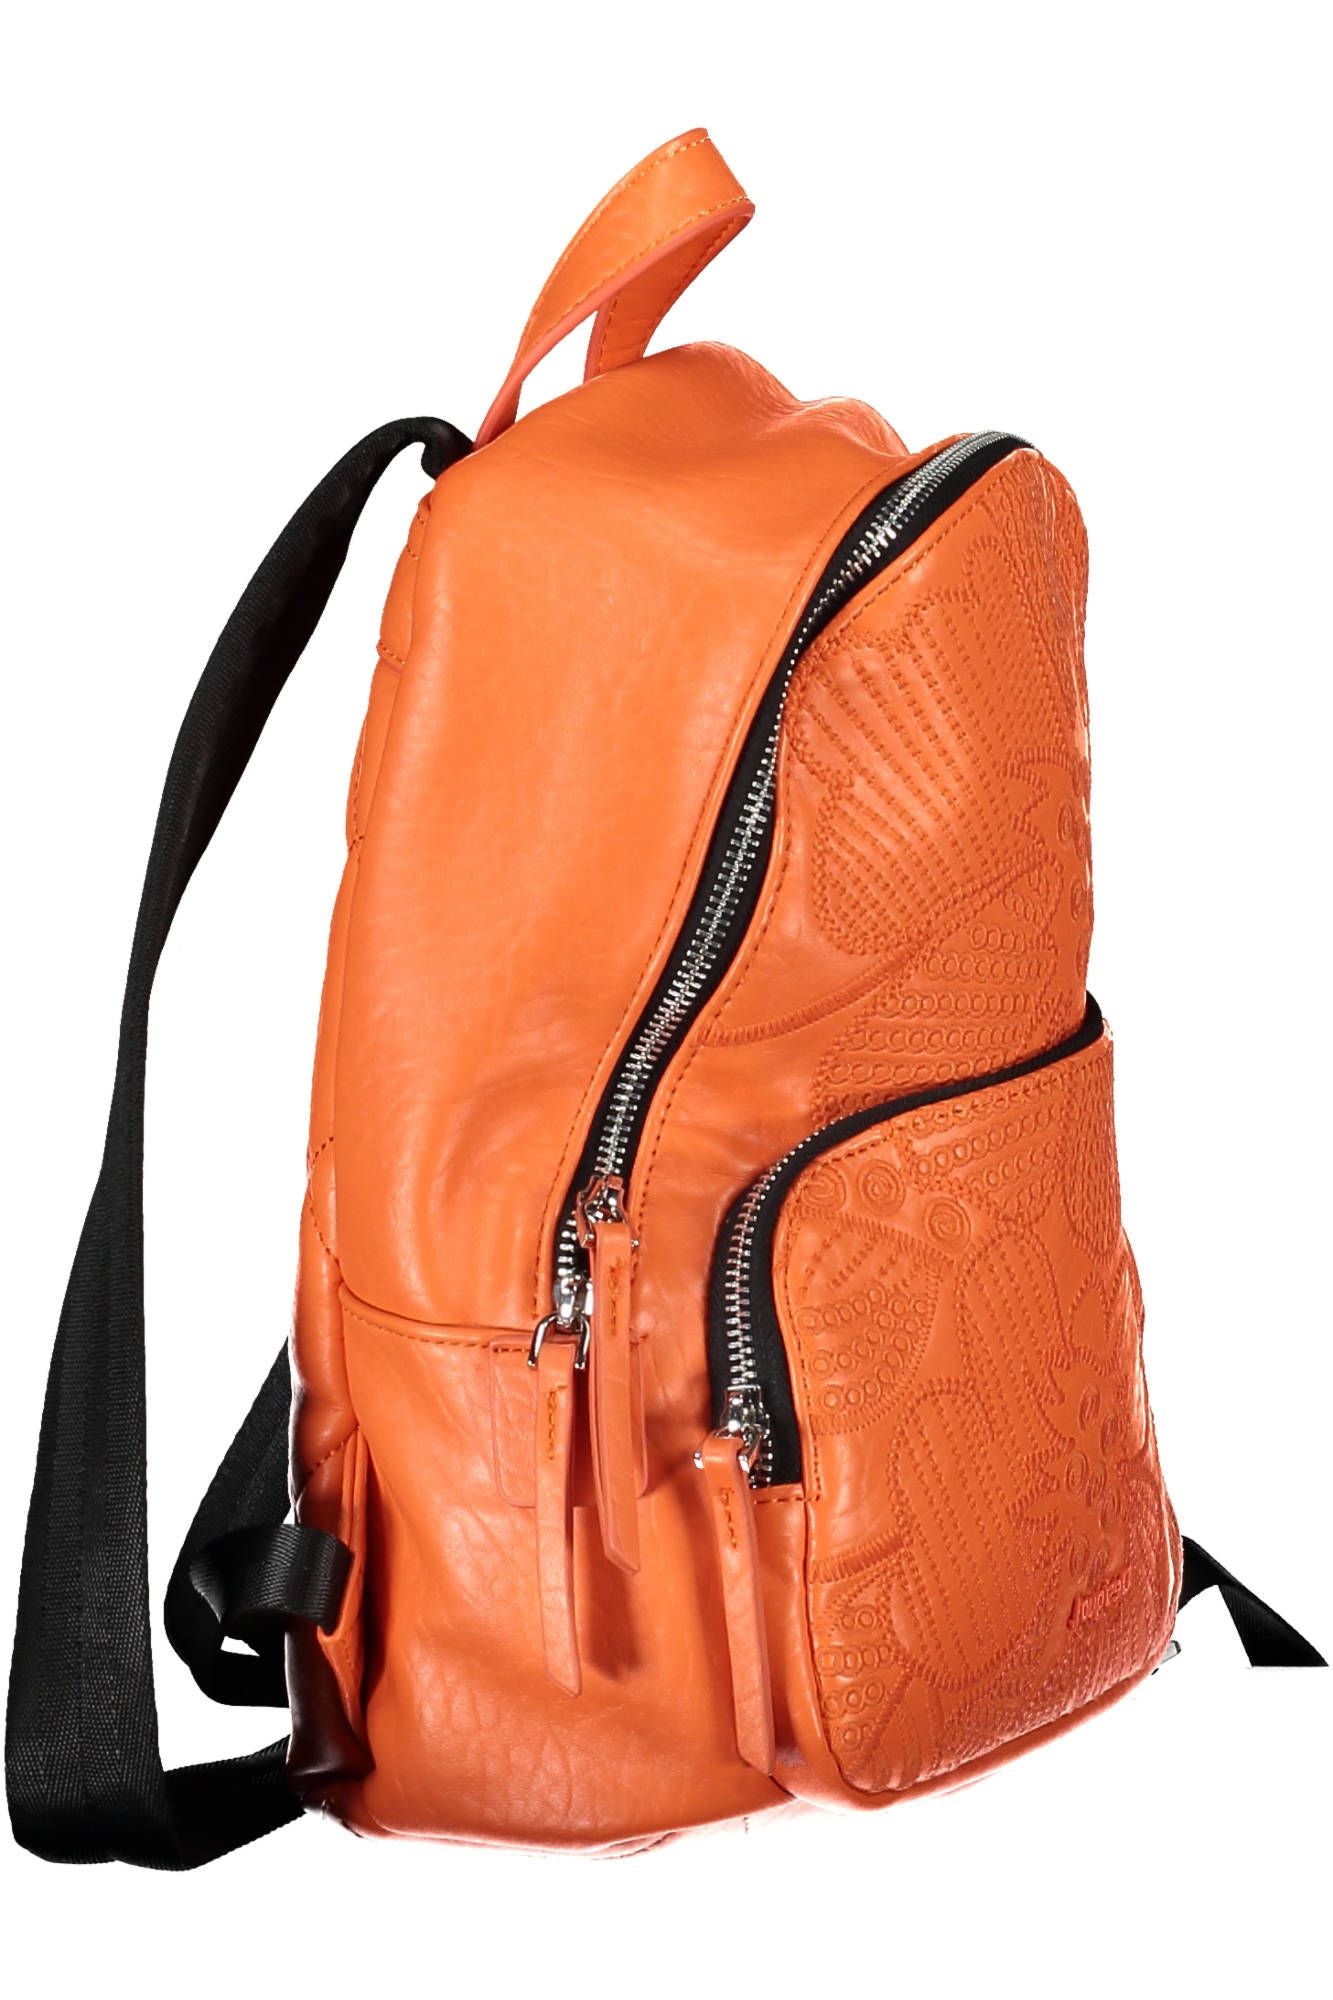 Chic Embroidered Orange Backpack with Contrasting Details